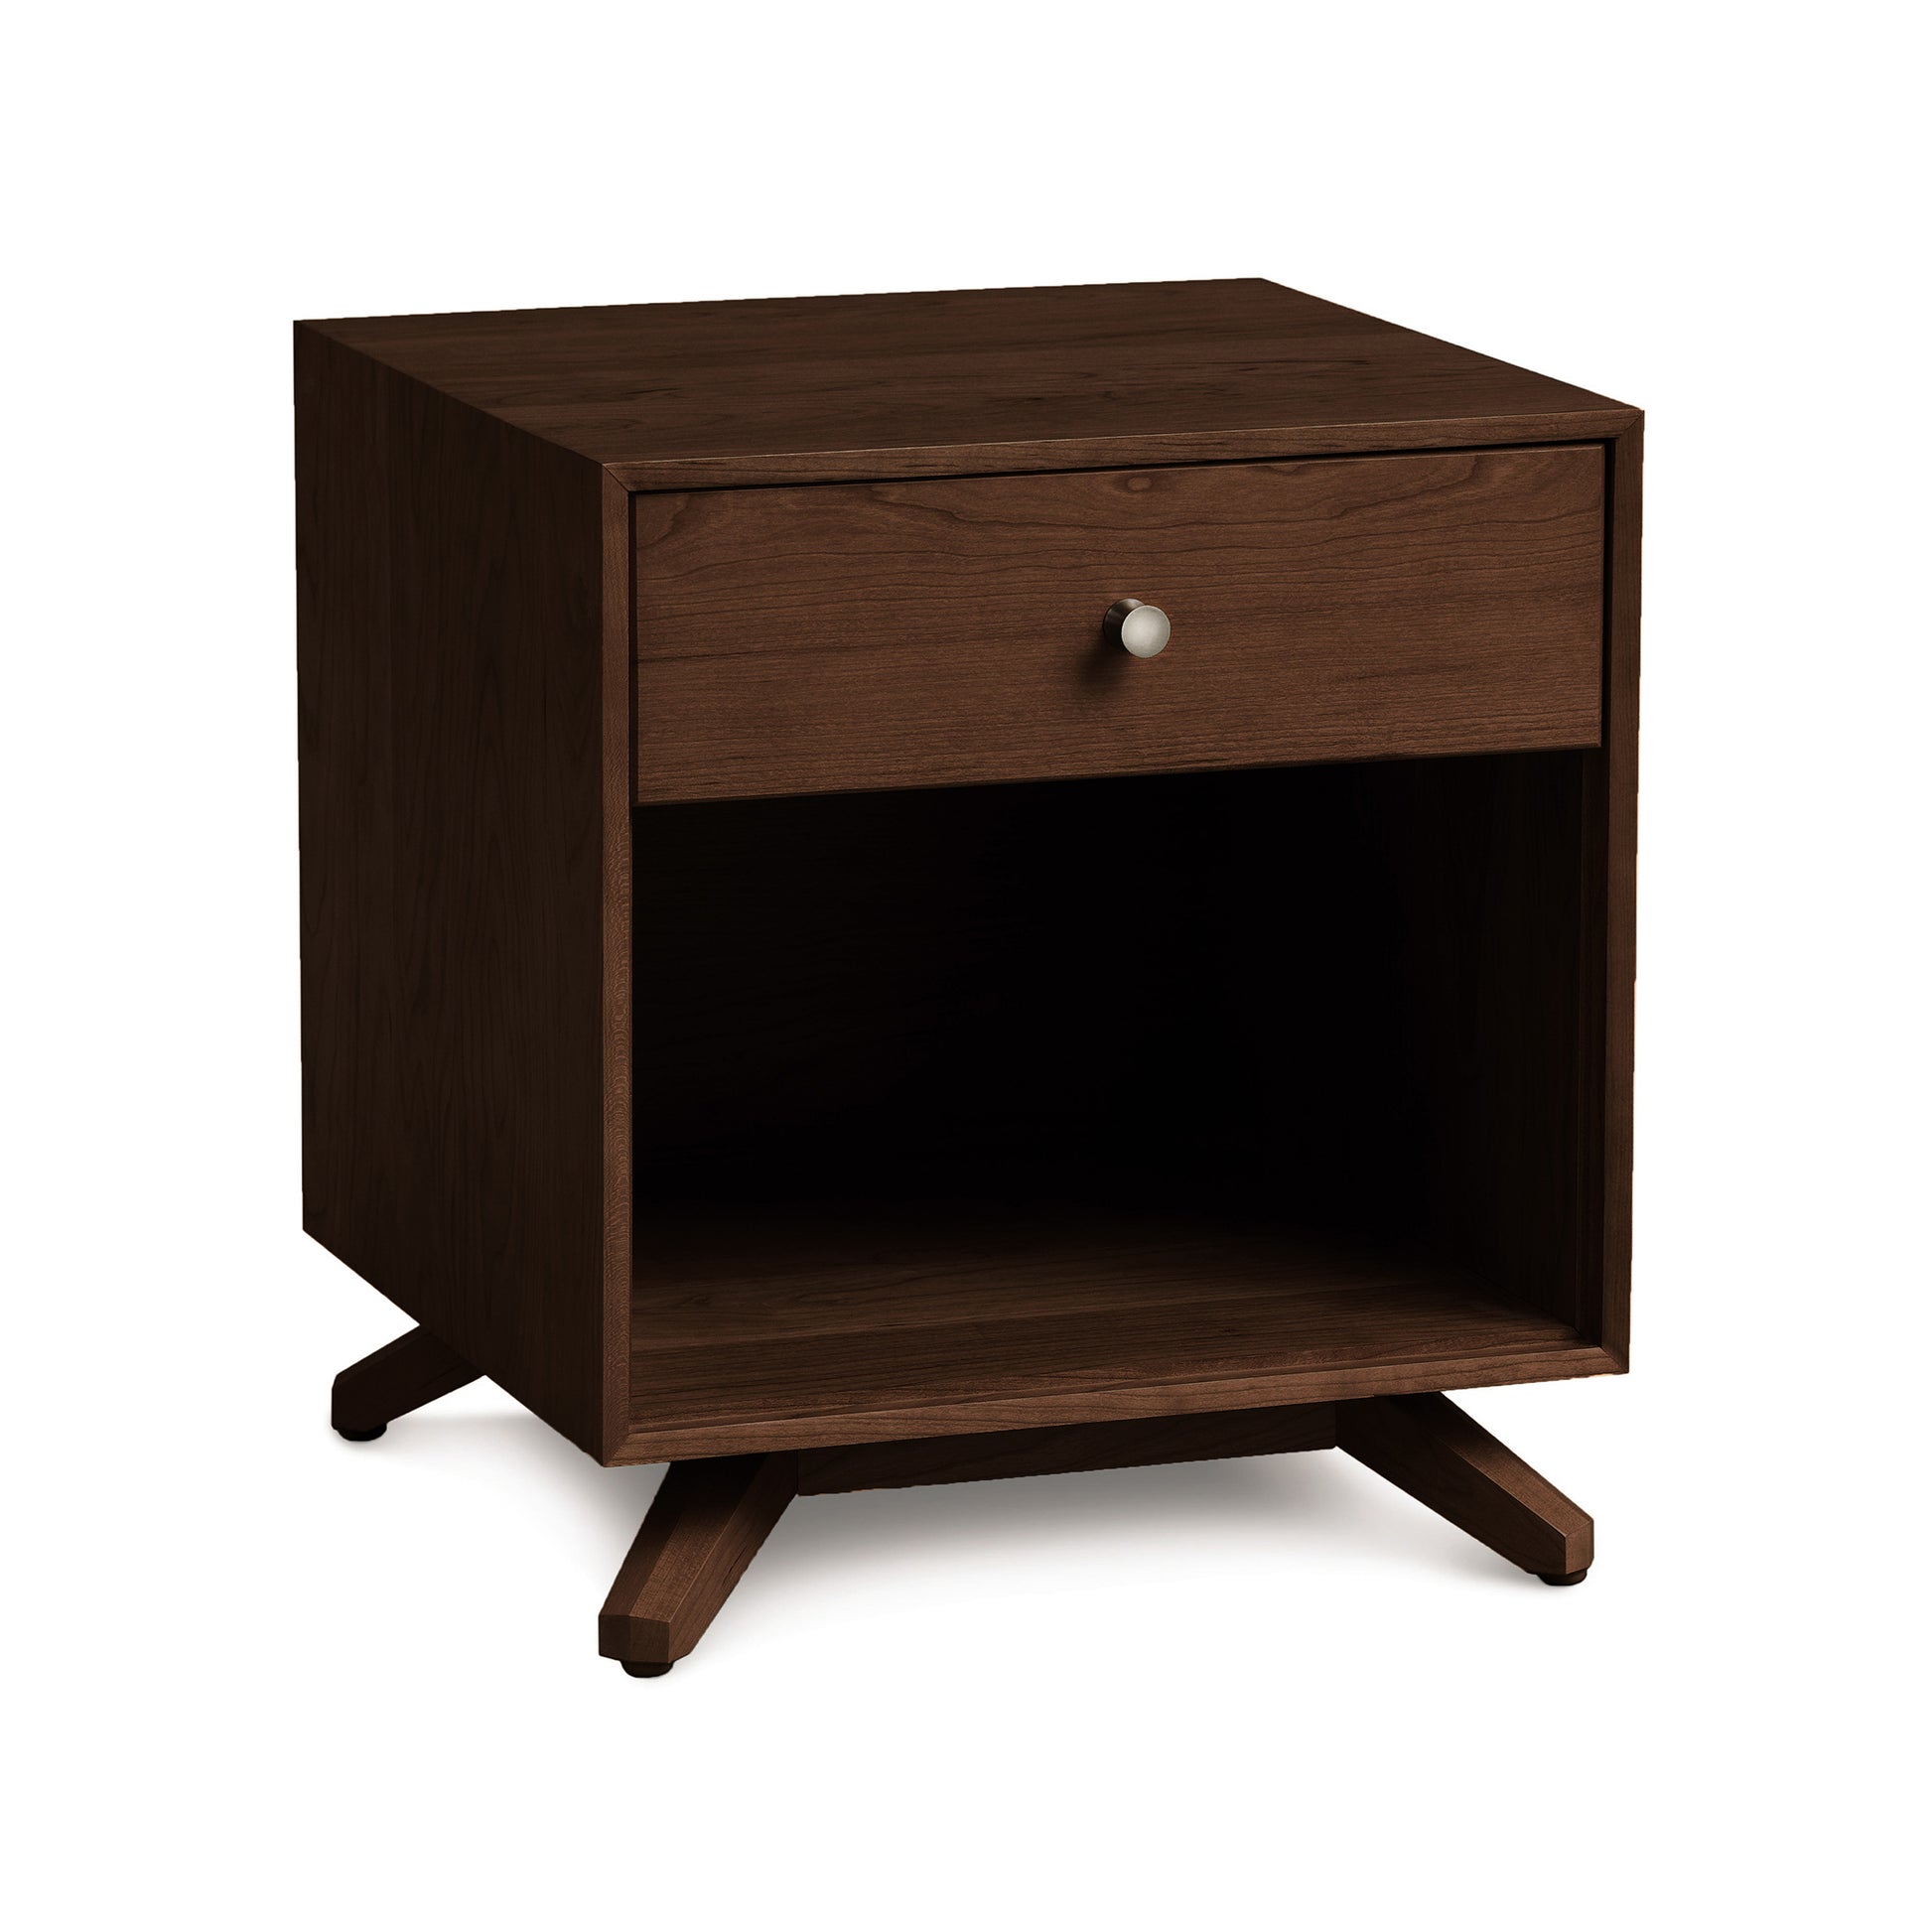 Contemporary furniture: Astrid 1-Drawer Enclosed Shelf Nightstand, handcrafted in Vermont by Copeland Furniture.